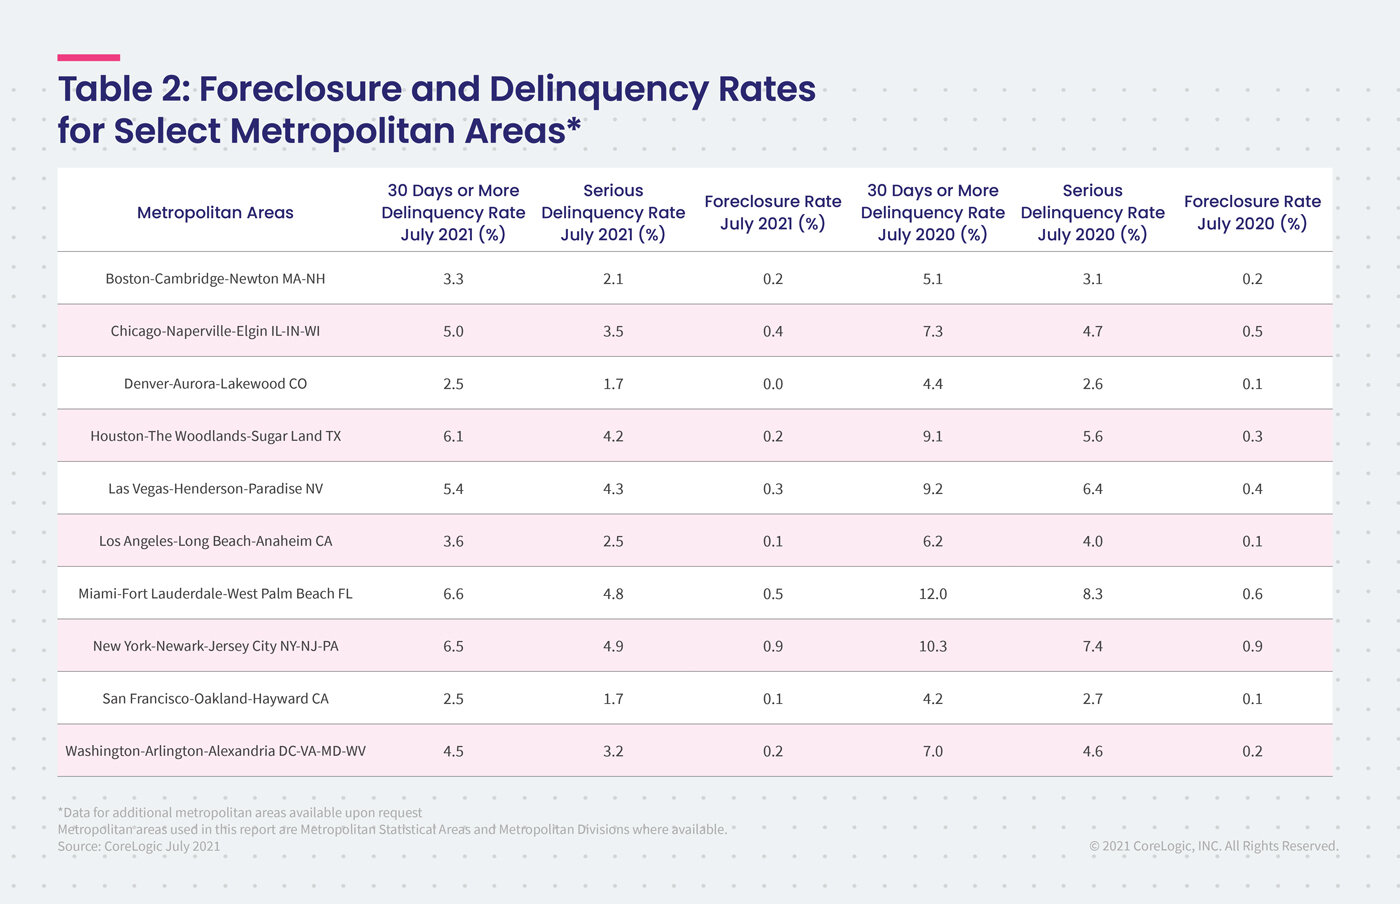 https://www.worldpropertyjournal.com/news-assets/Foreclosure-and-delinquency-rates-for-select-metros.jpg